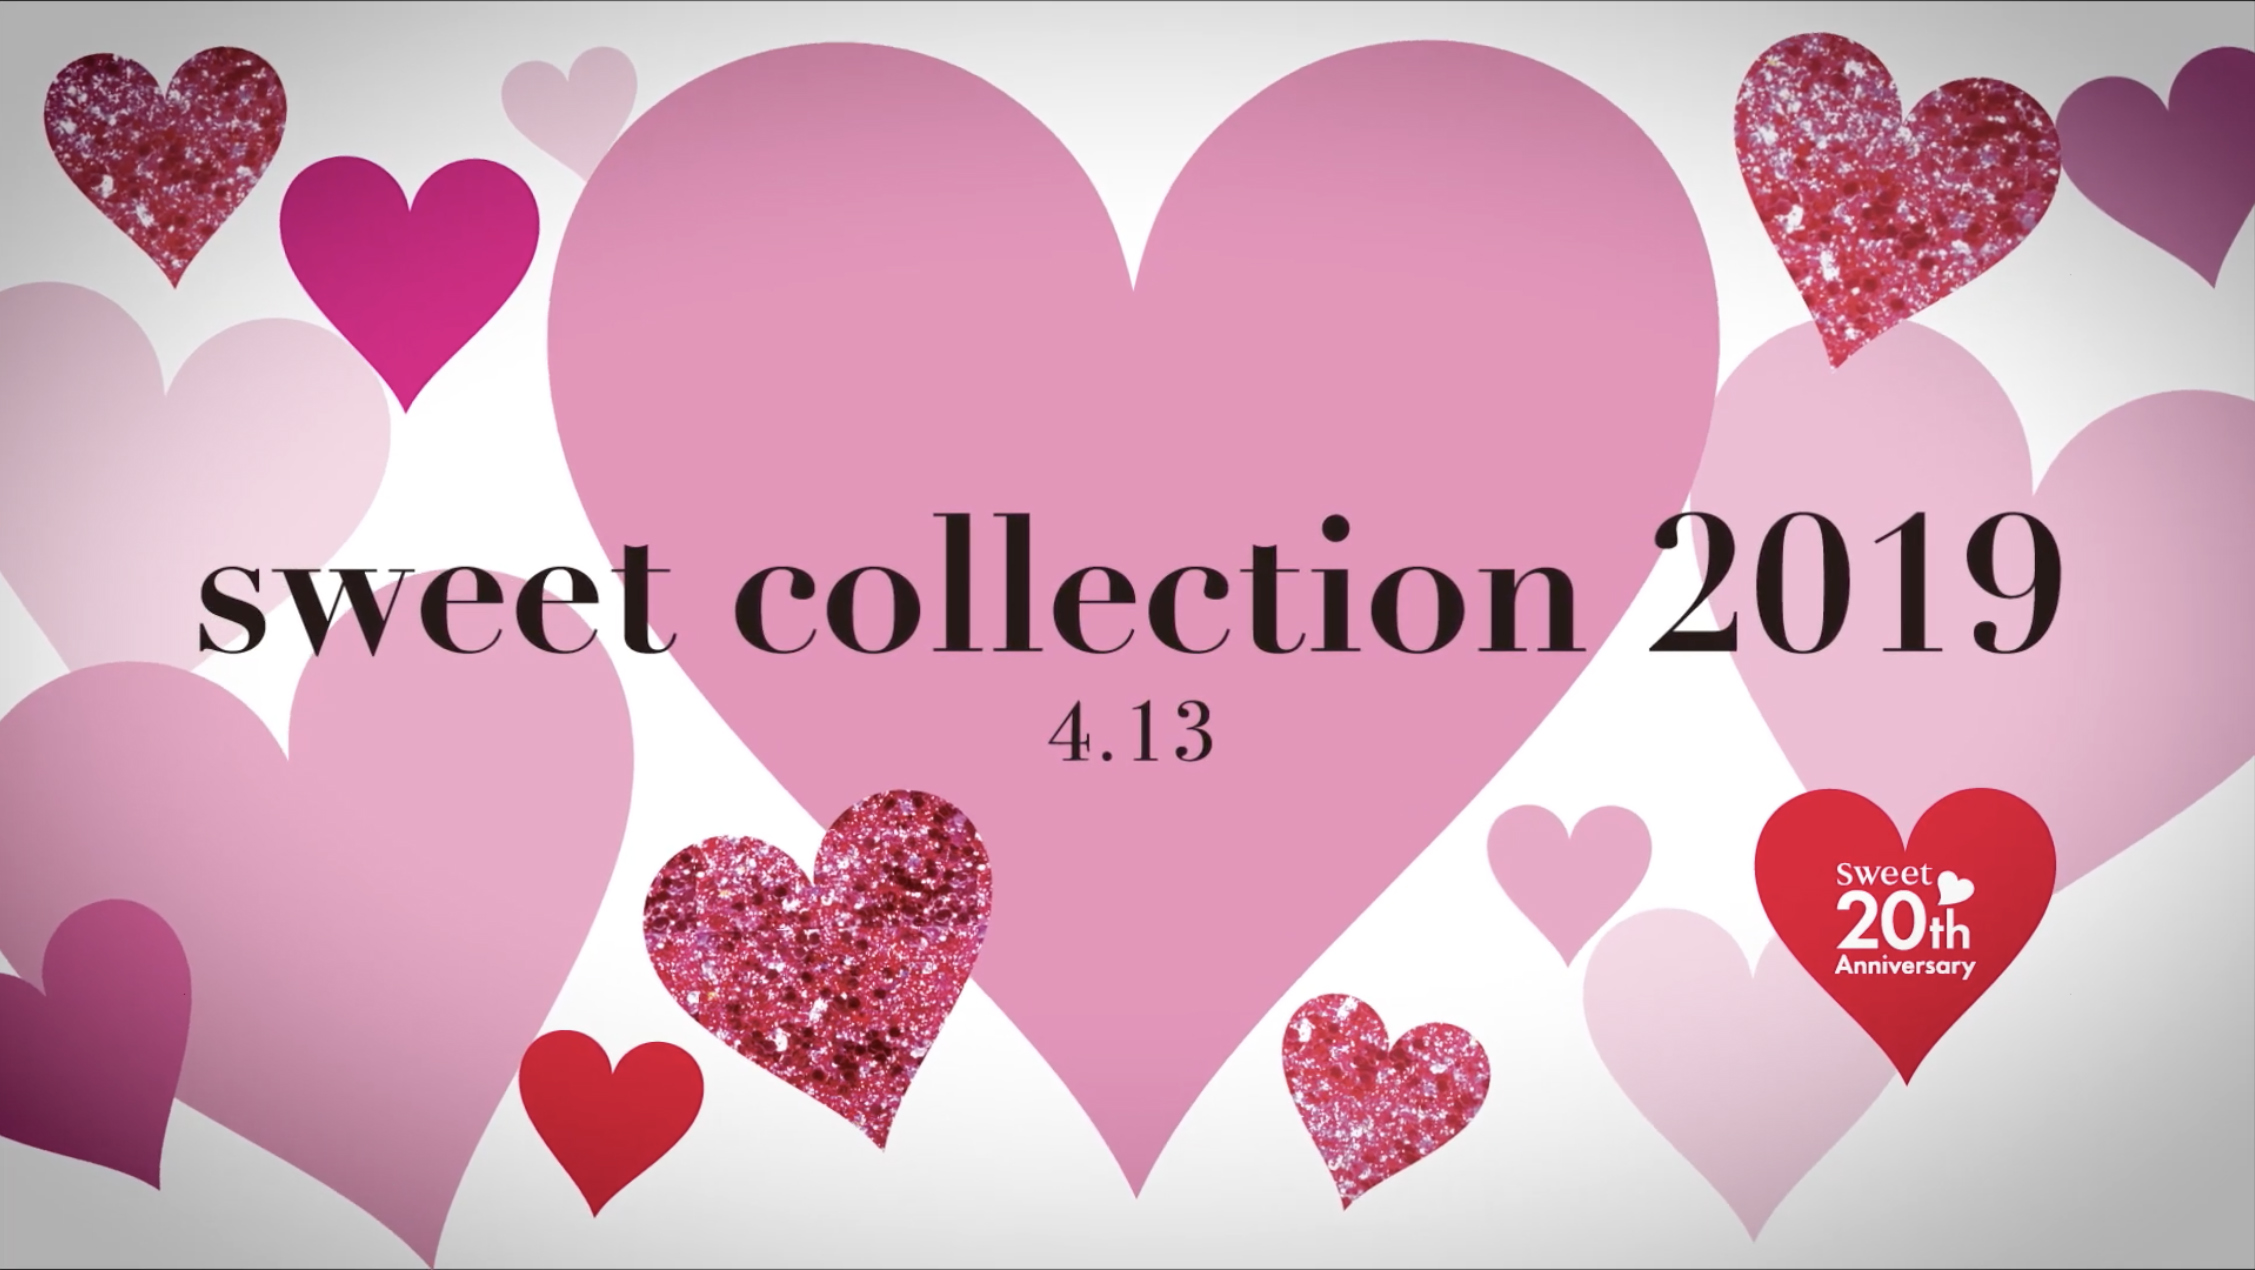 【sweetcollection2019】出展の動画をアップしました！